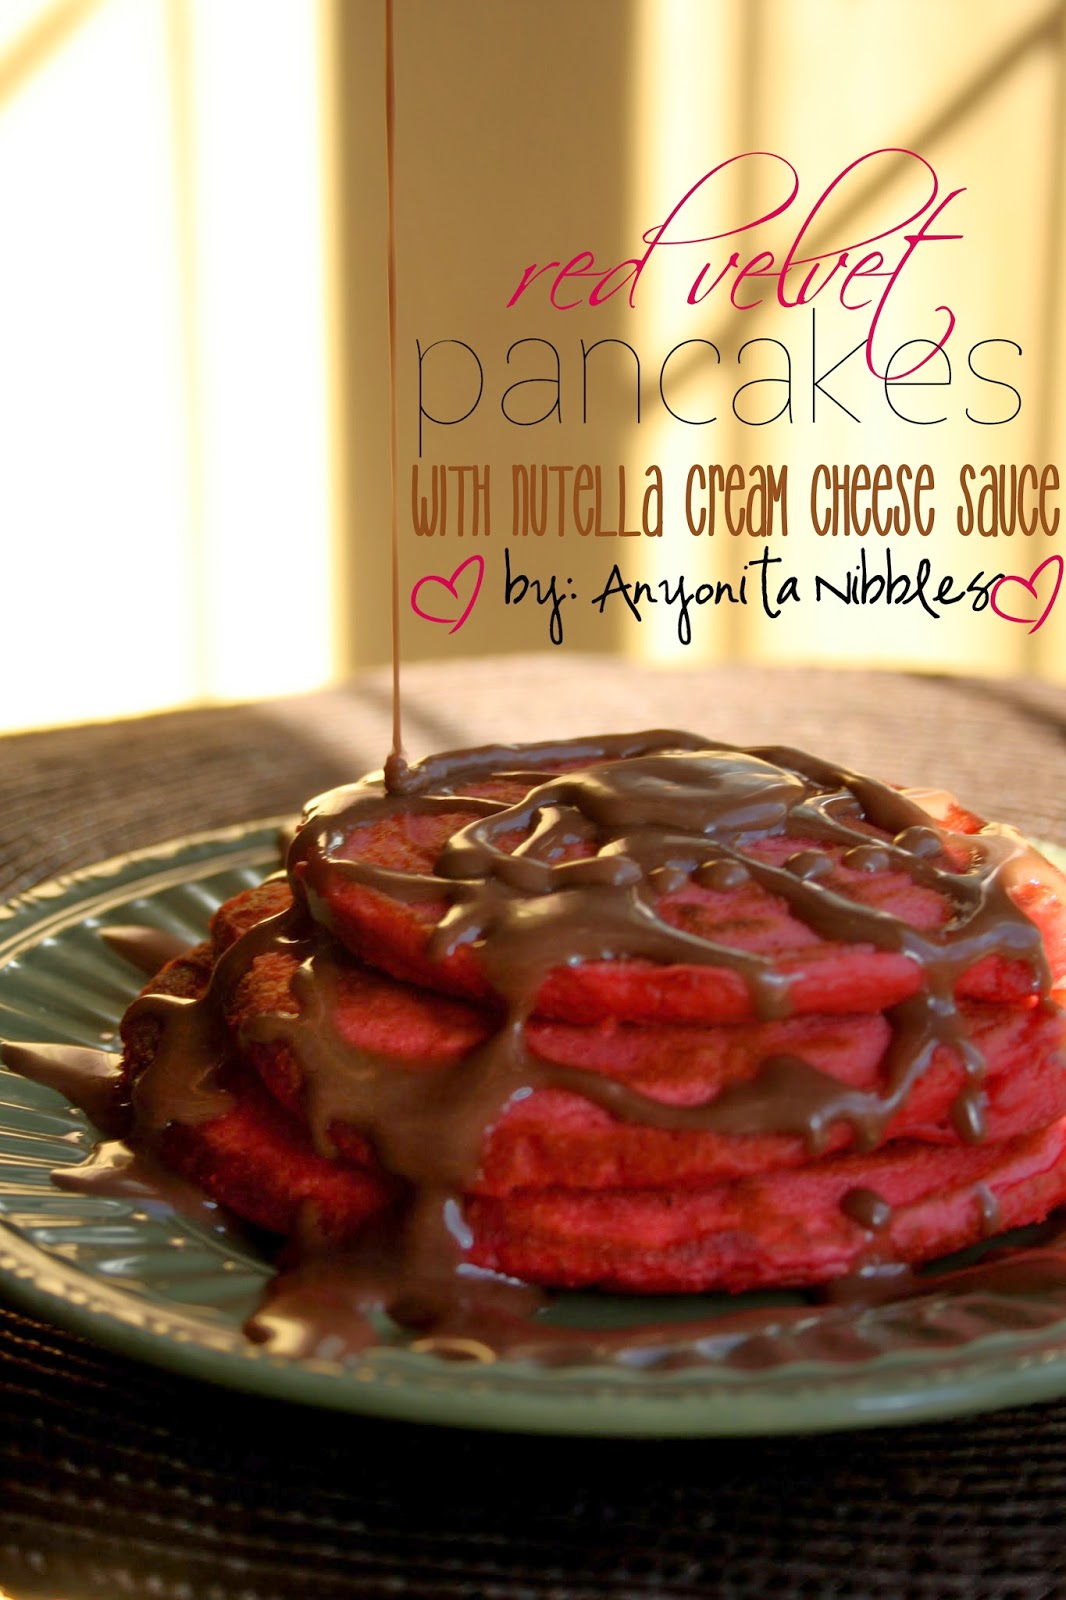 Red Velvet Pancakes with Nutella Cream Cheese Sauce